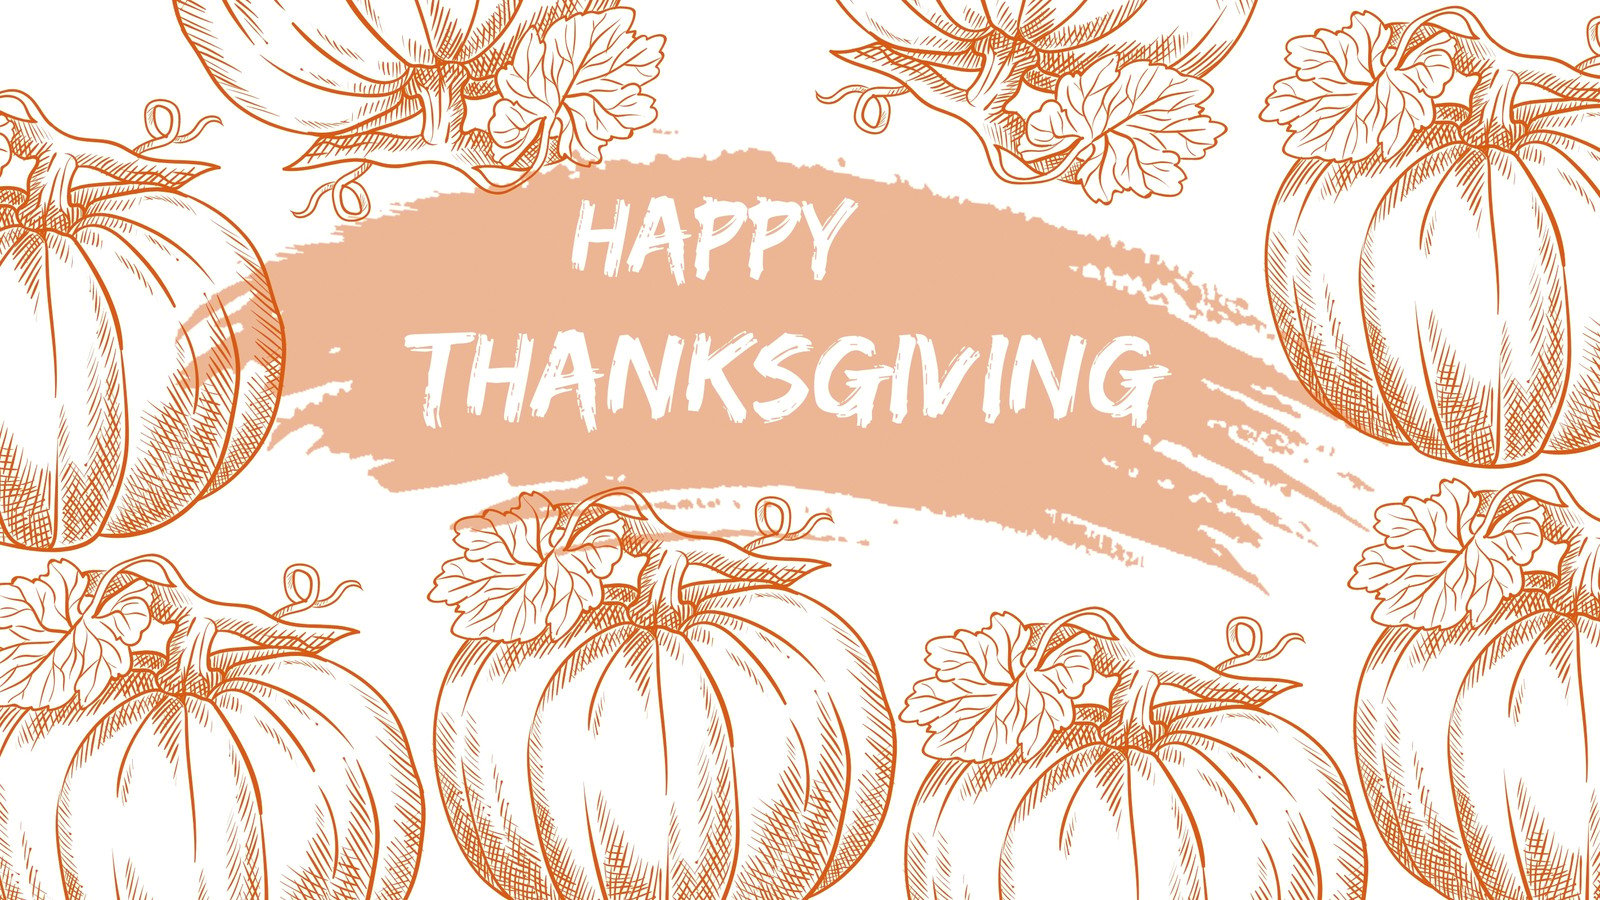 Free to edit Thanksgiving video templates | Canva